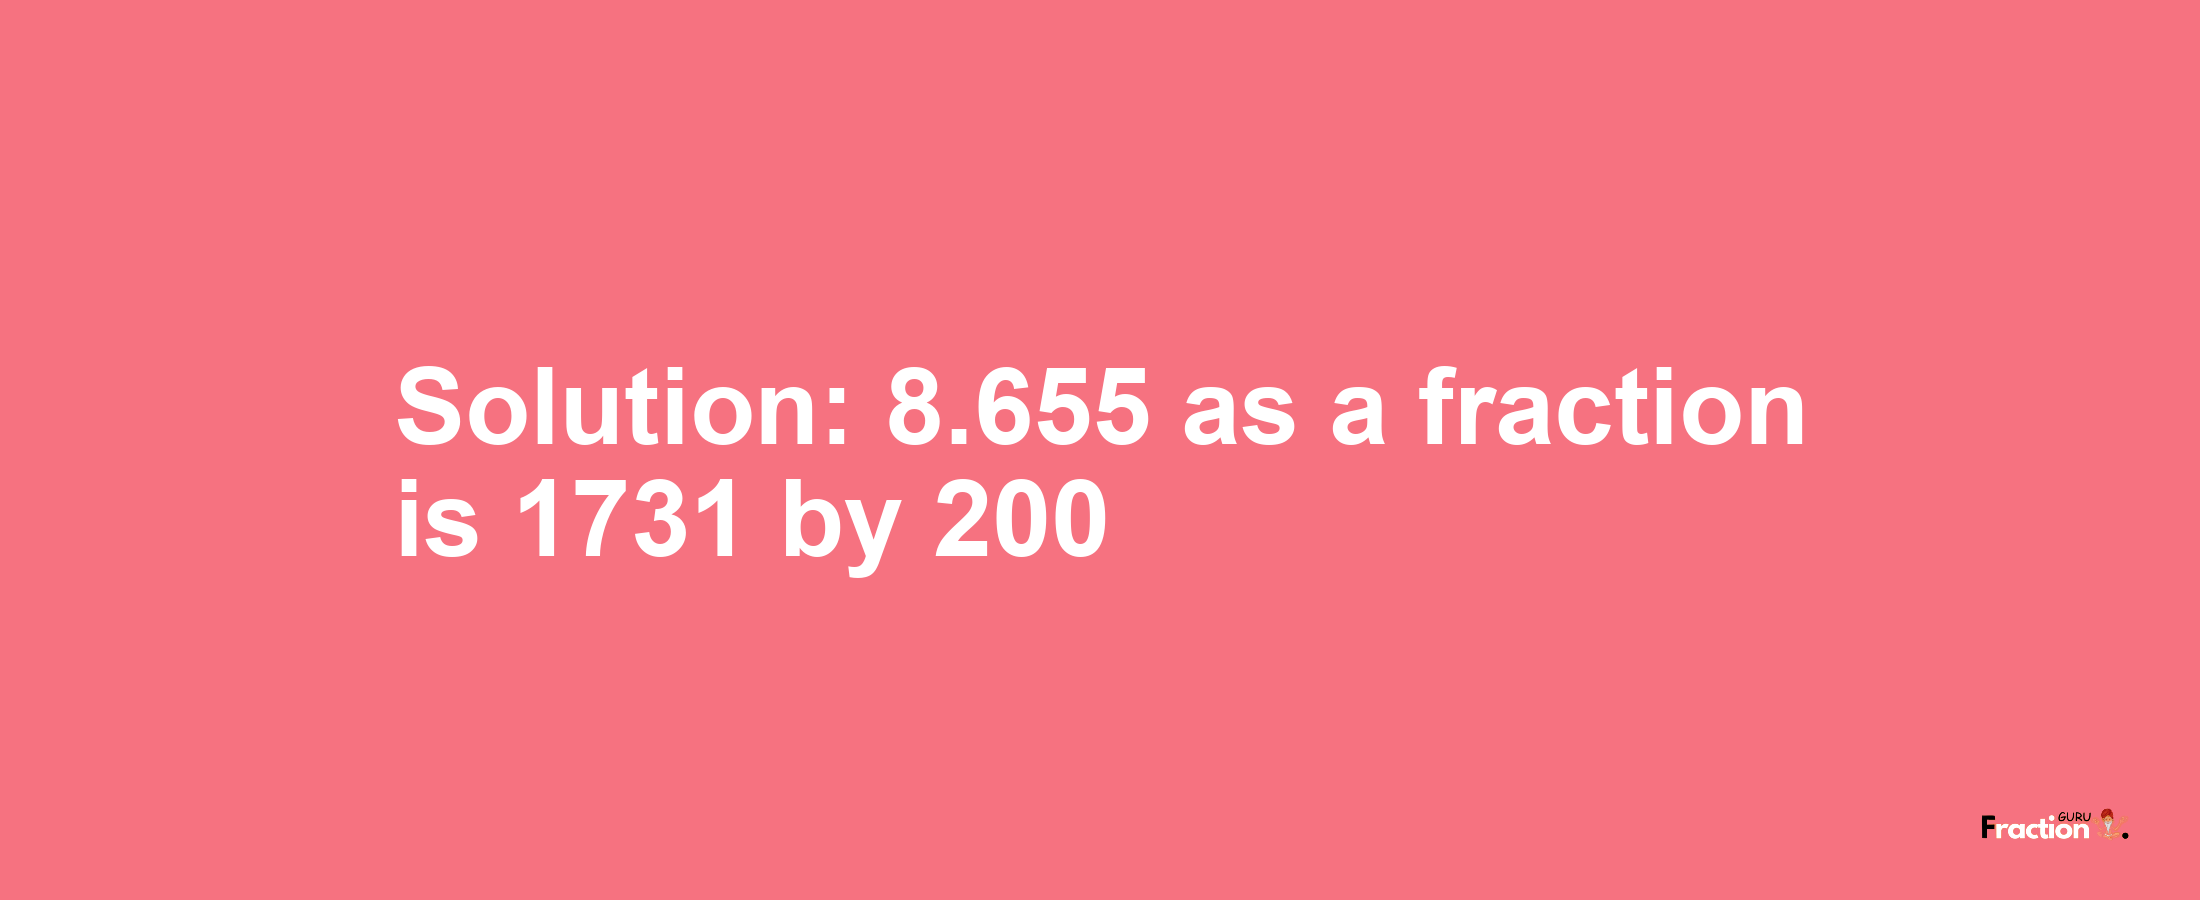 Solution:8.655 as a fraction is 1731/200